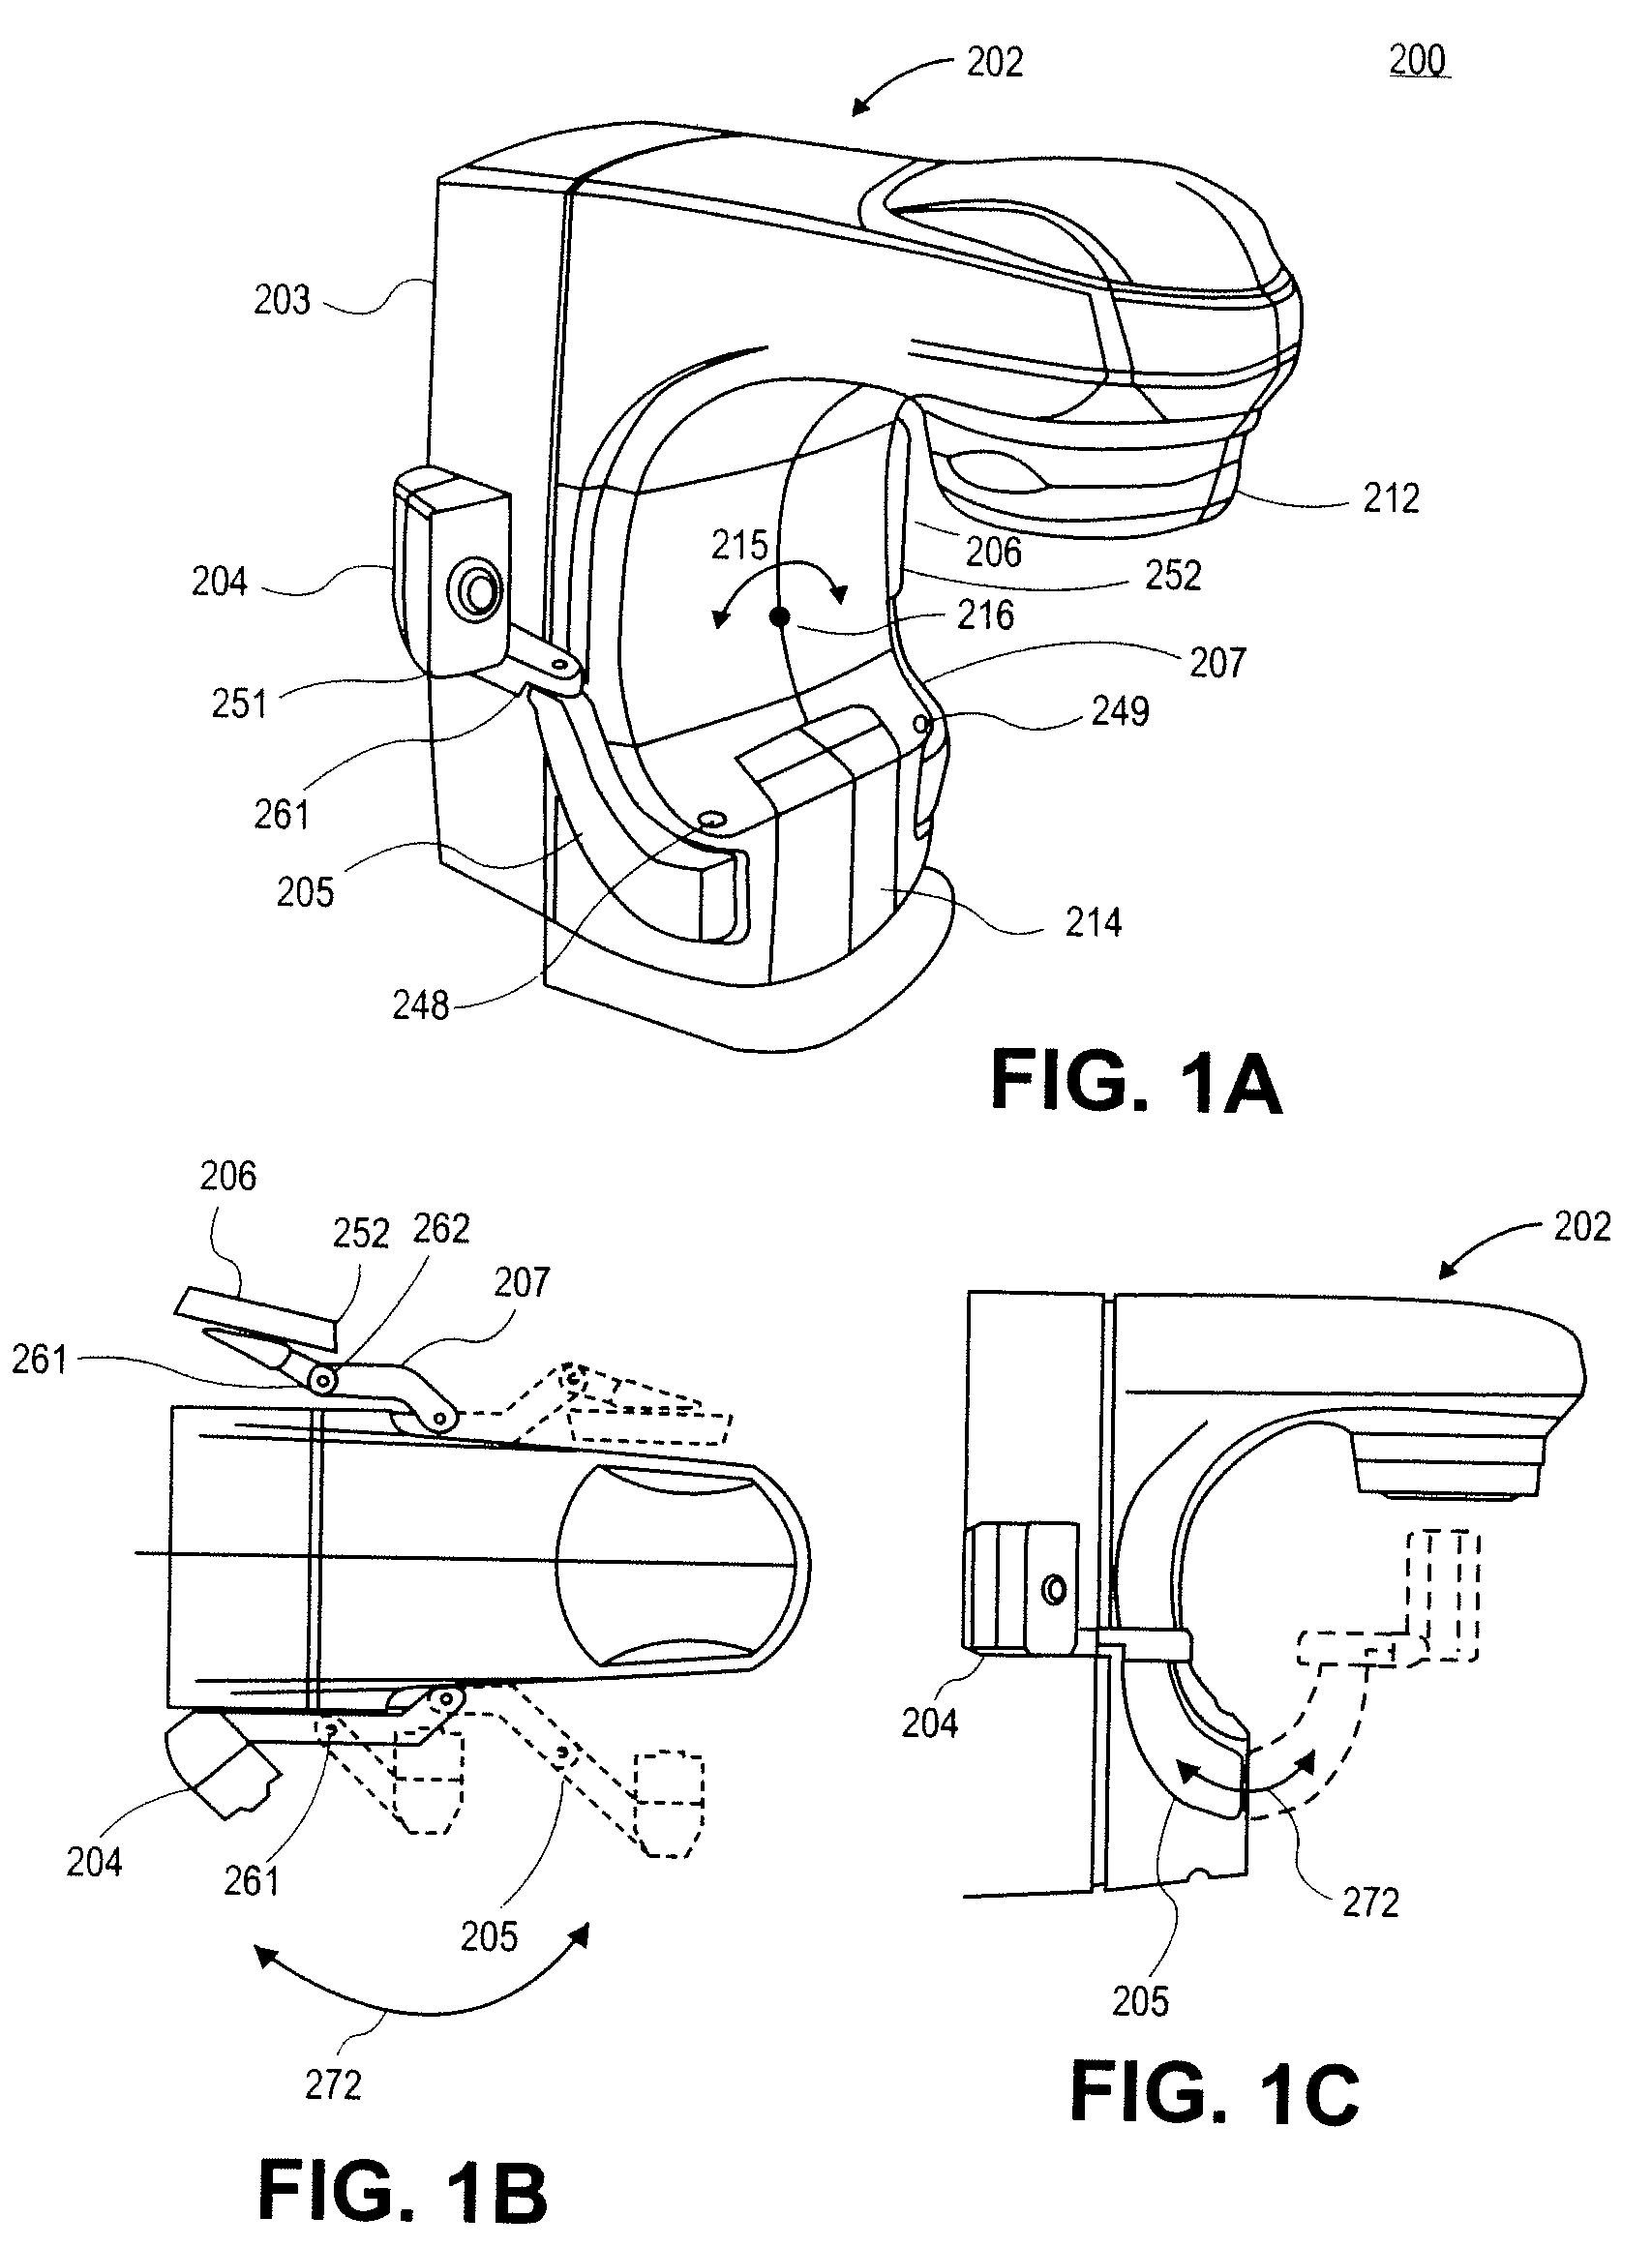 Imaging device for radiation treatment applications